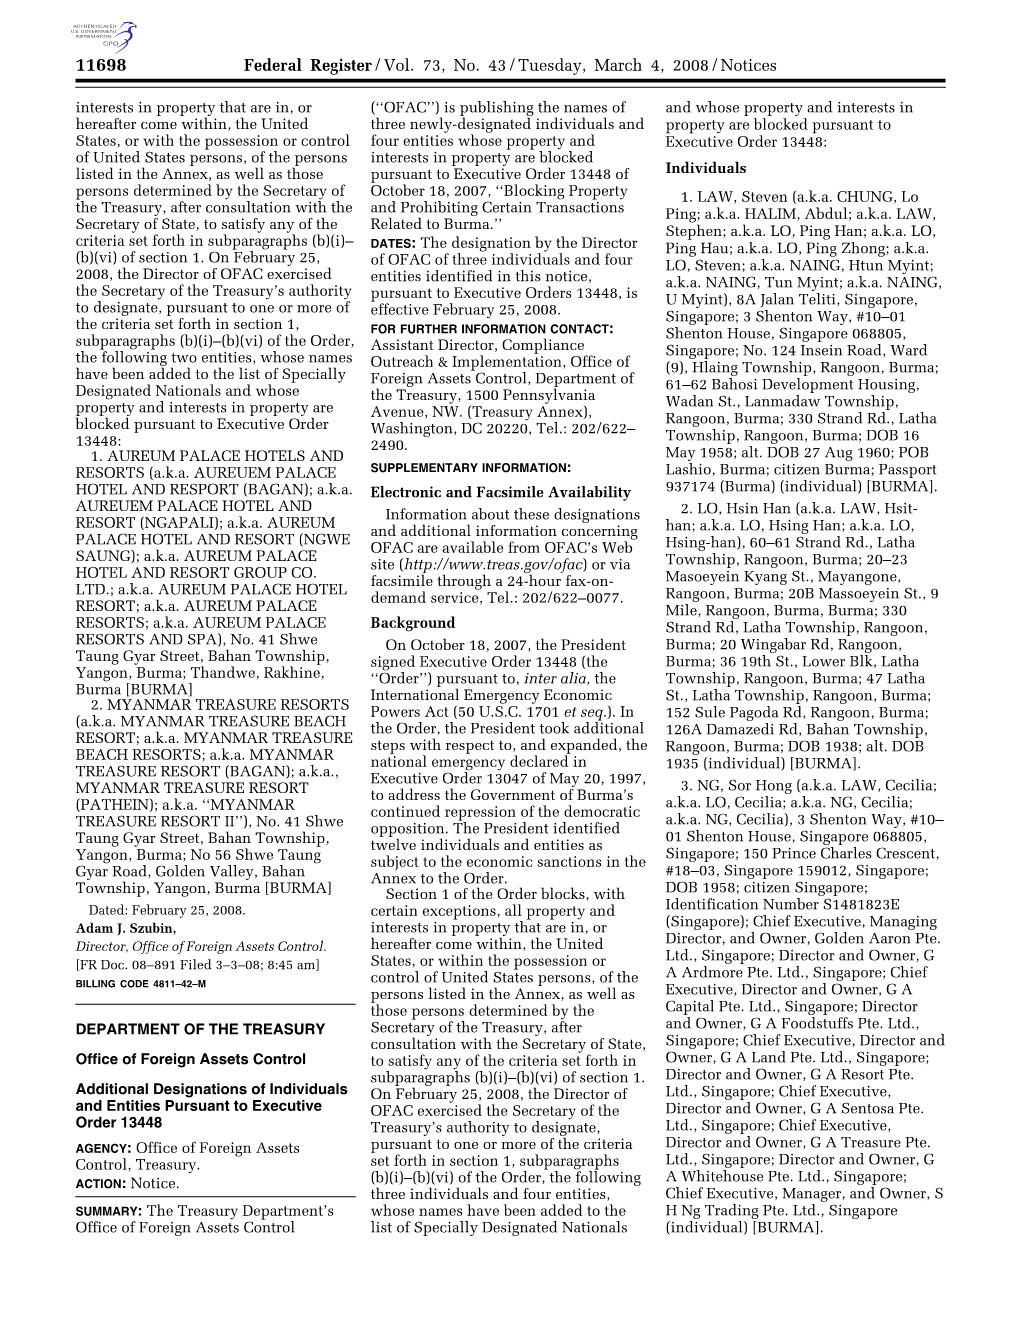 Federal Register/Vol. 73, No. 43/Tuesday, March 4, 2008/Notices